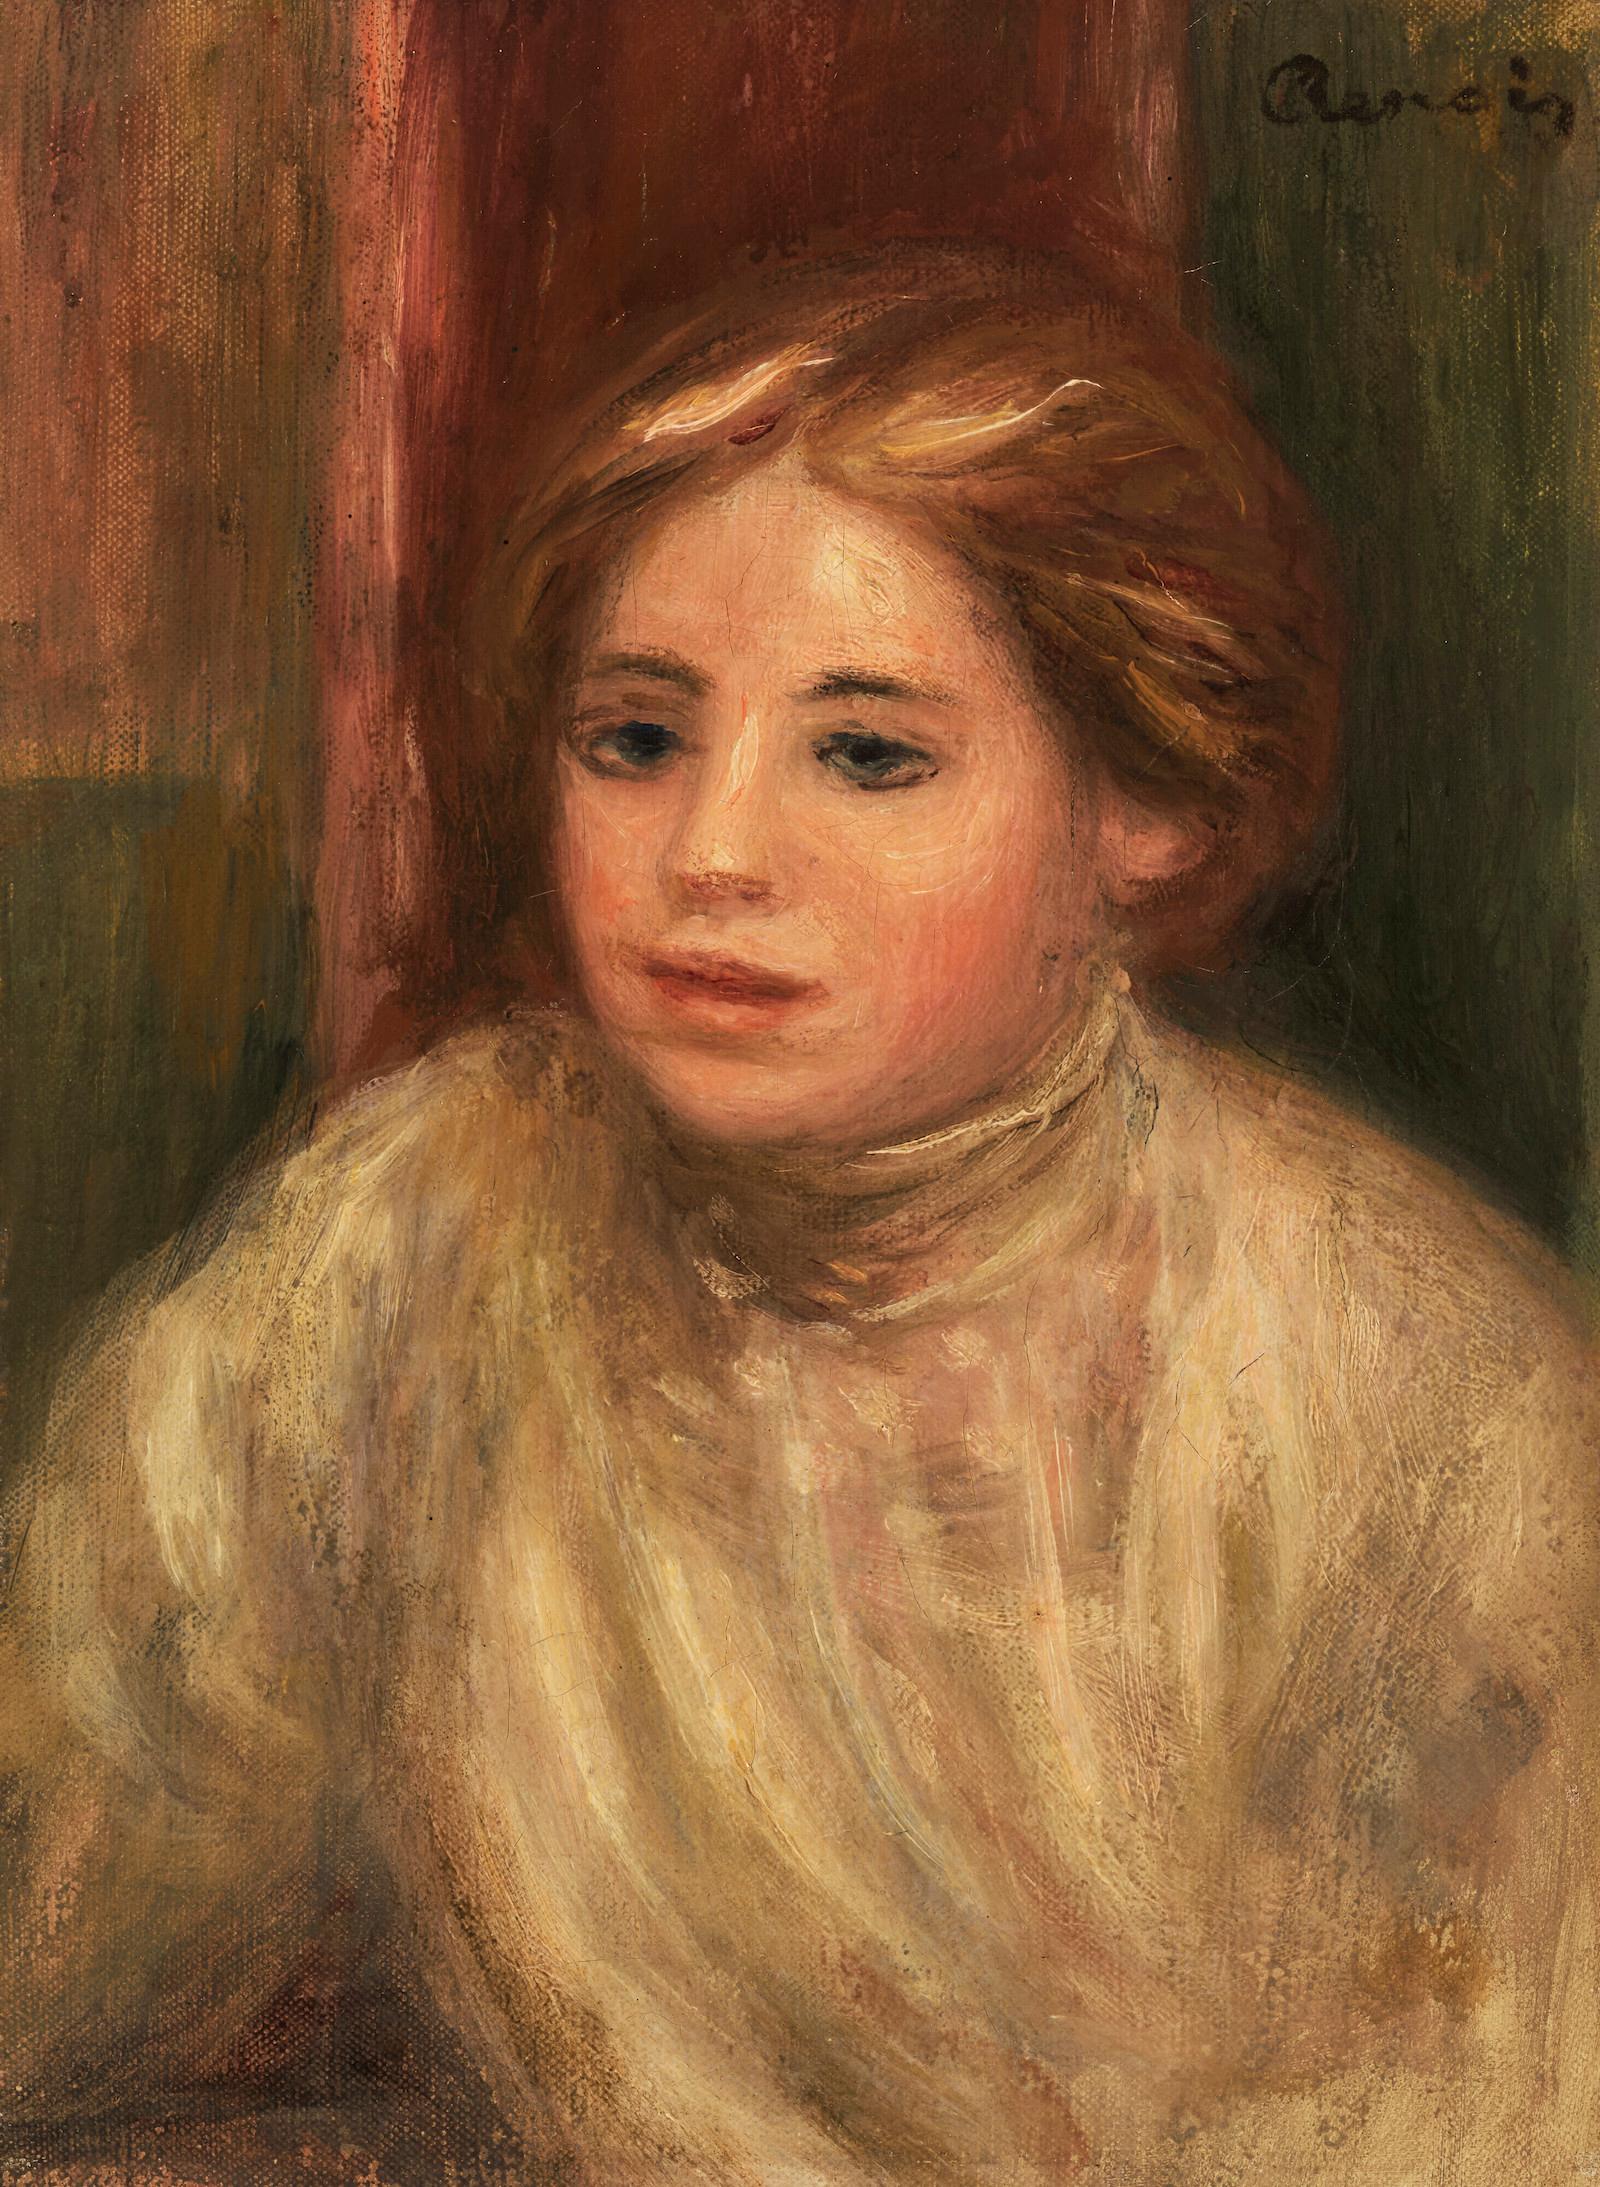 *PLEASE NOTE UK BUYERS WILL ONLY PAY 5% VAT ON THIS PURCHASE.

Tête de Femme Blonde	by Pierre-Auguste Renoir (1841-1919)
Oil on canvas
26.1 x 19 cm (10 ¹/₄ x 7 ¹/₂ inches)
Signed upper right, Renoir
Executed in 1908

From the 1890s onwards, Renoir's